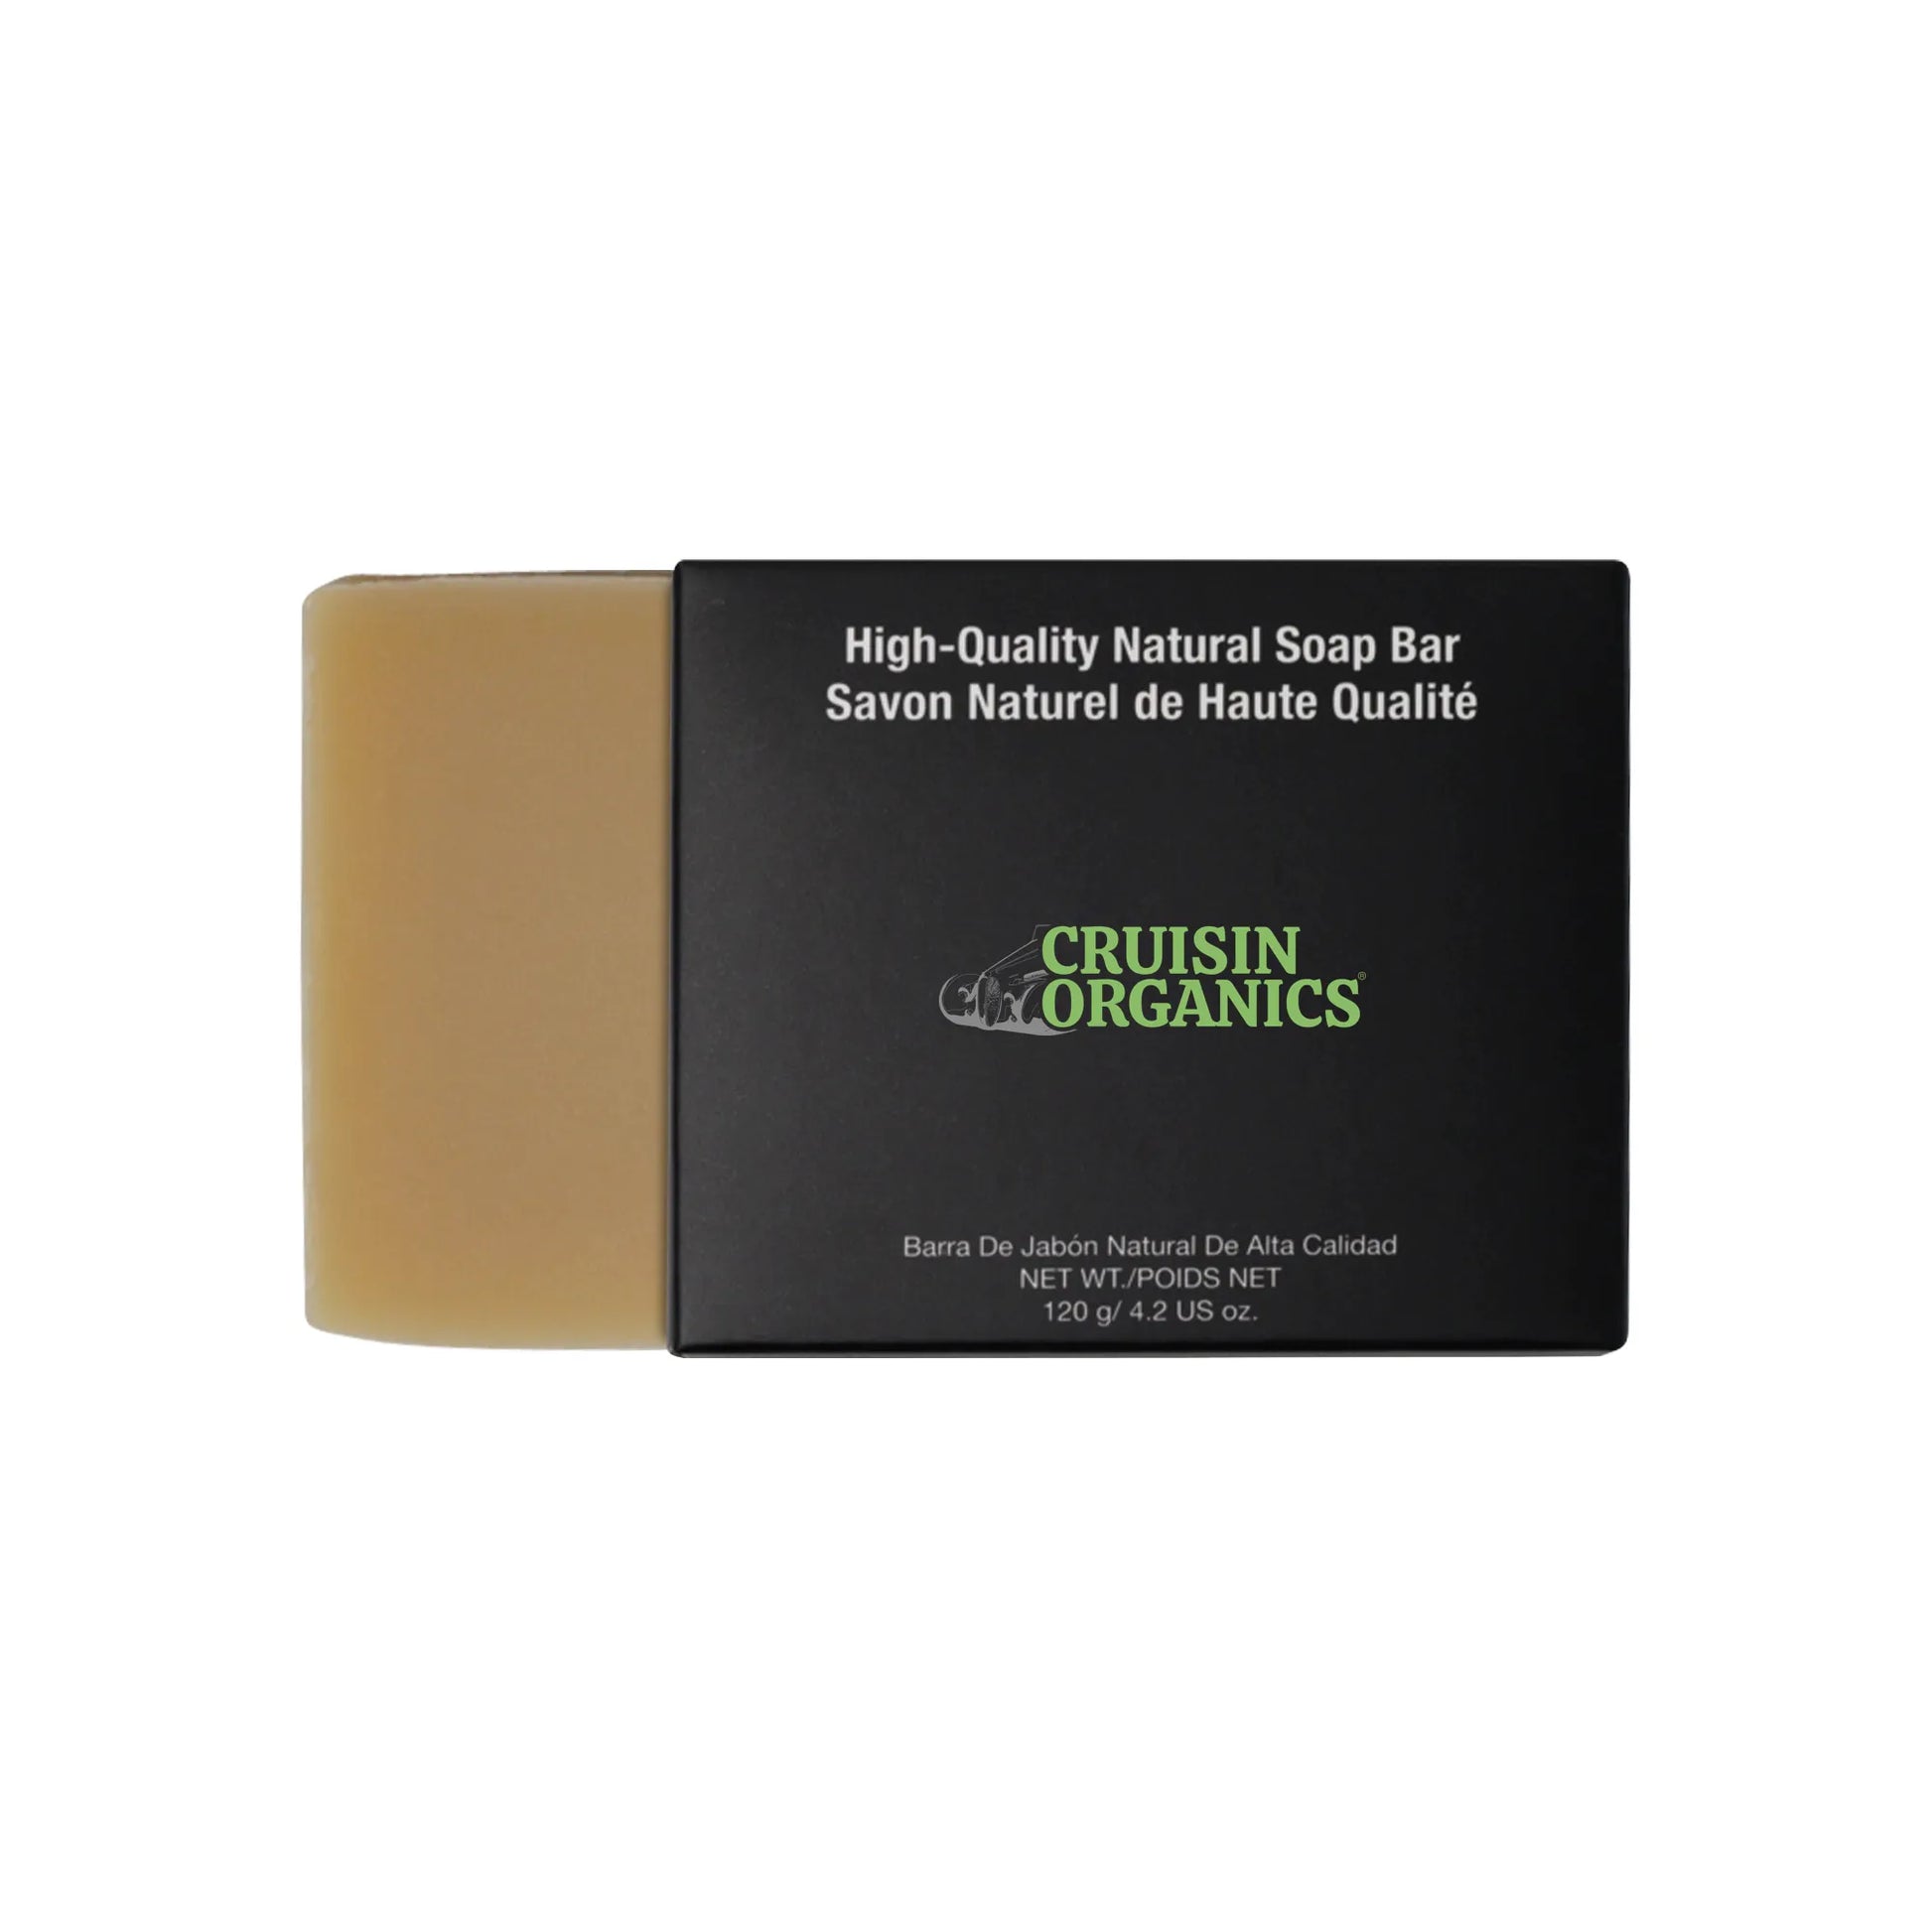 Benefits of rose and honey with our Cruisin Organics Honey Rose Soap. Infused with rosehip extracts and geranium essential oil, this soap helps reveal a youthful complexion while also evening out skin tone. speeds healing and reduces inflammation. 